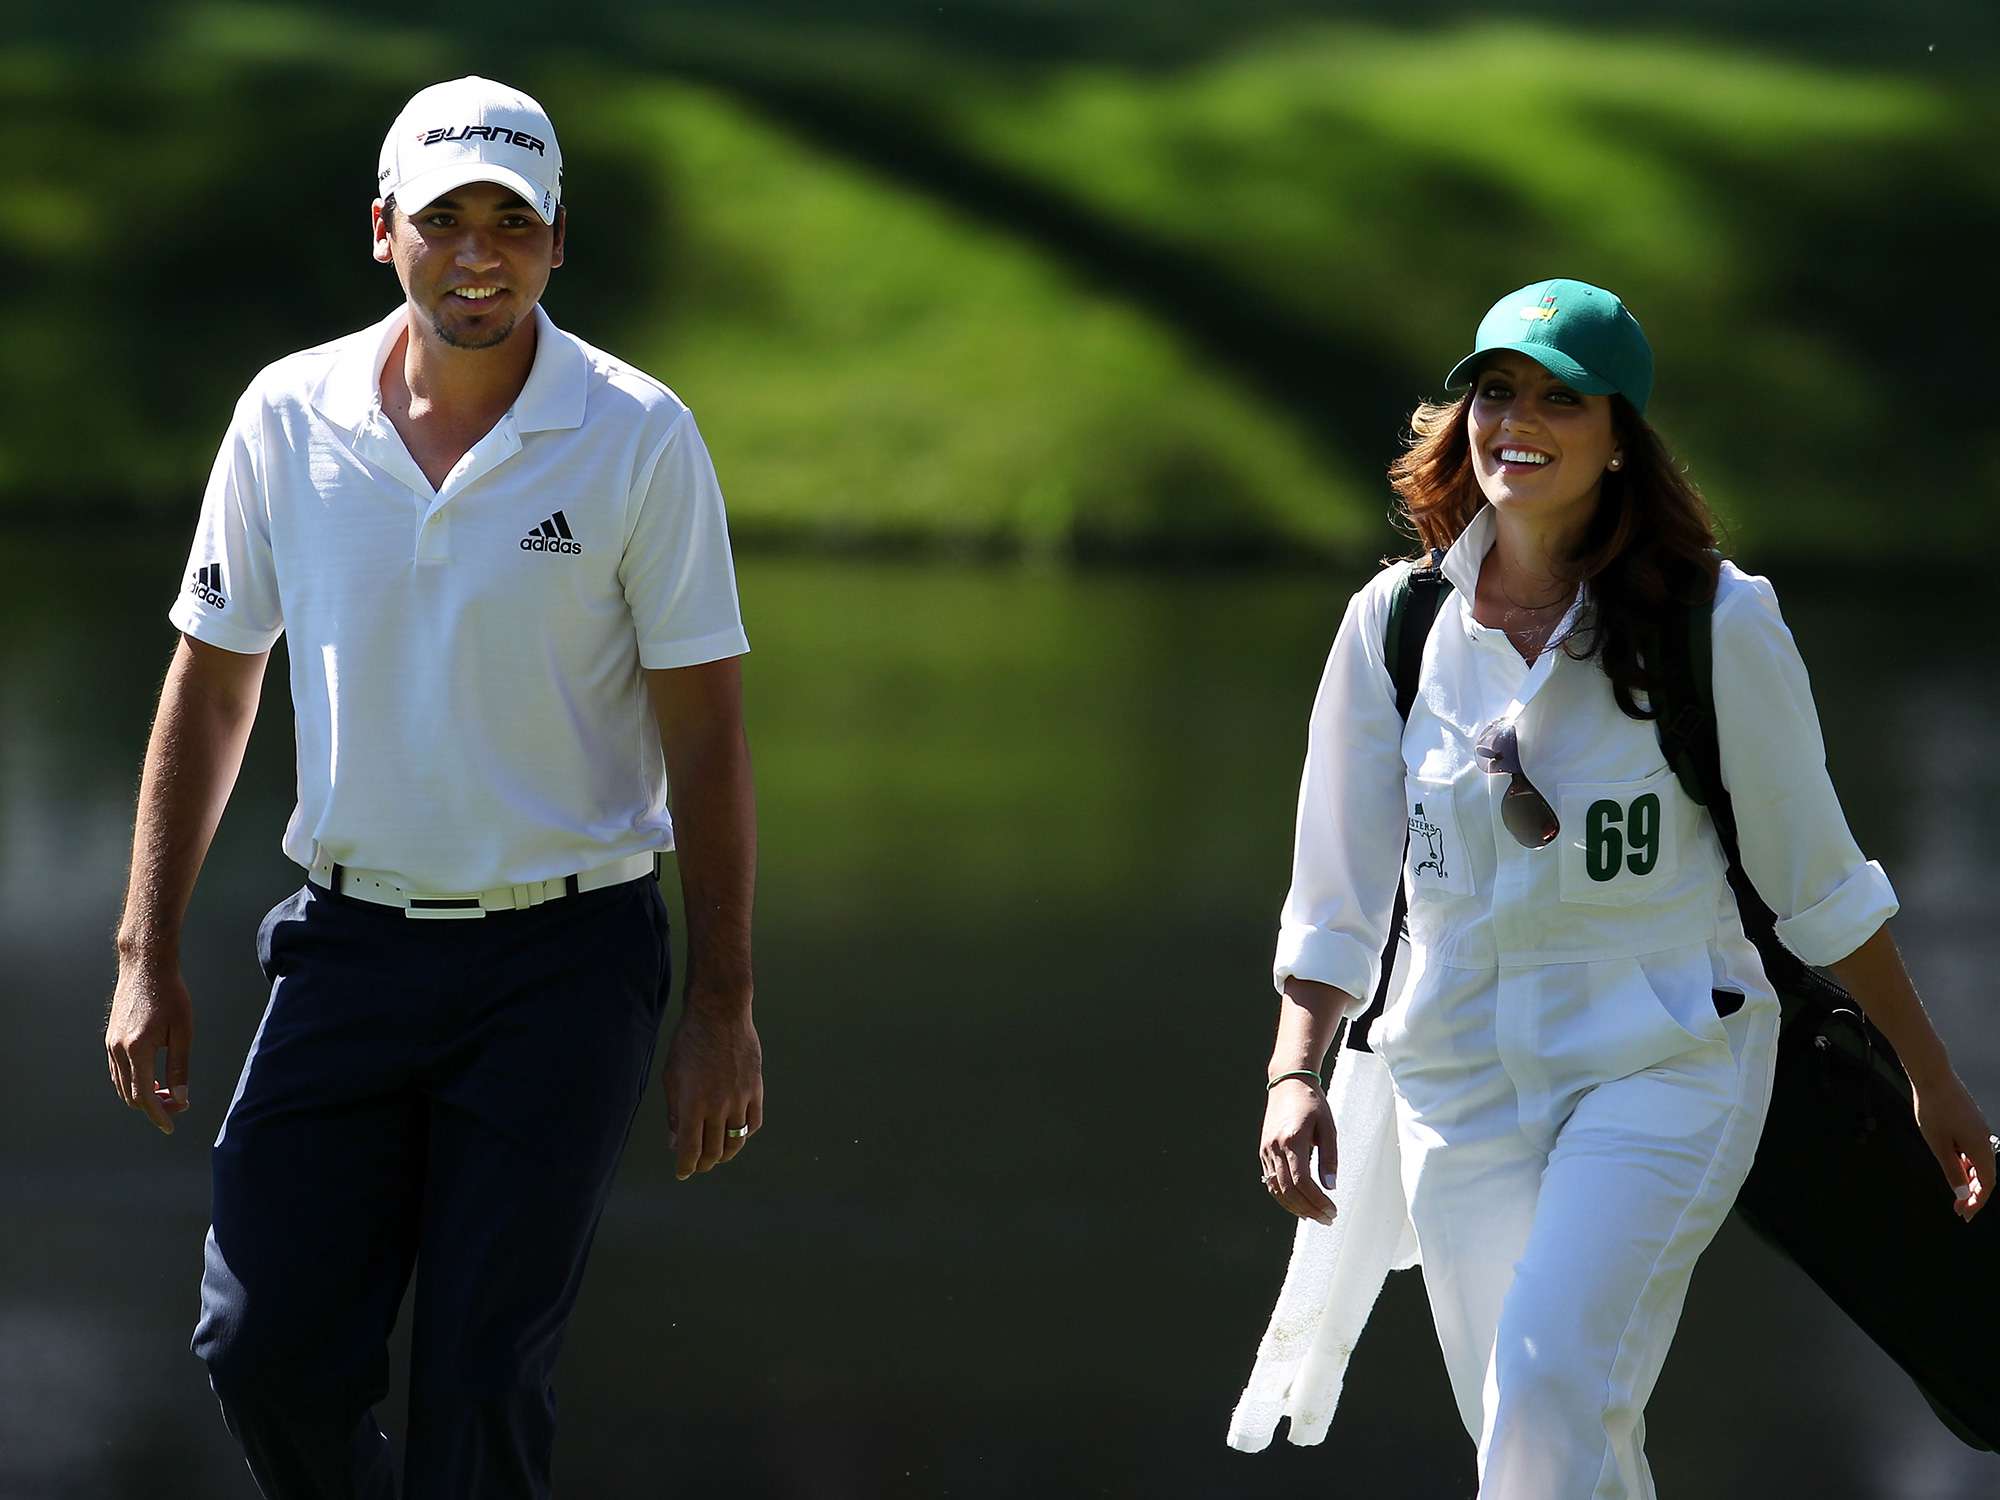 Jason Day and Ellie Day during the Par 3 Contest prior to the 2011 Masters Tournament at Augusta National Golf Club on April 6, 2011.